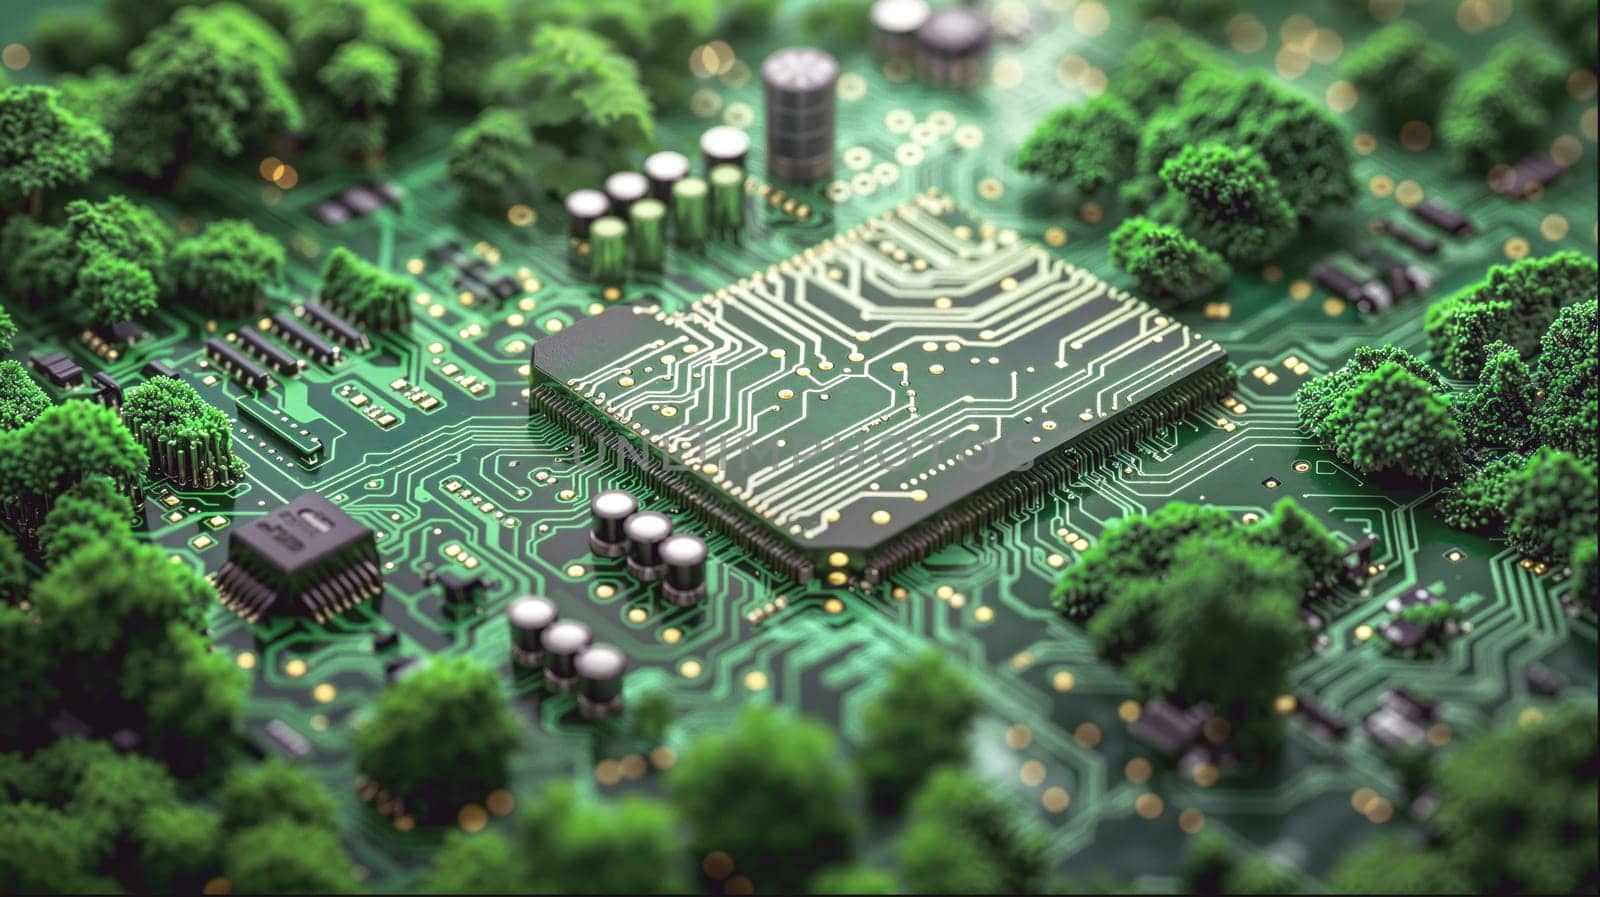 Circuit board with trees symbolizes connection between technology and nature